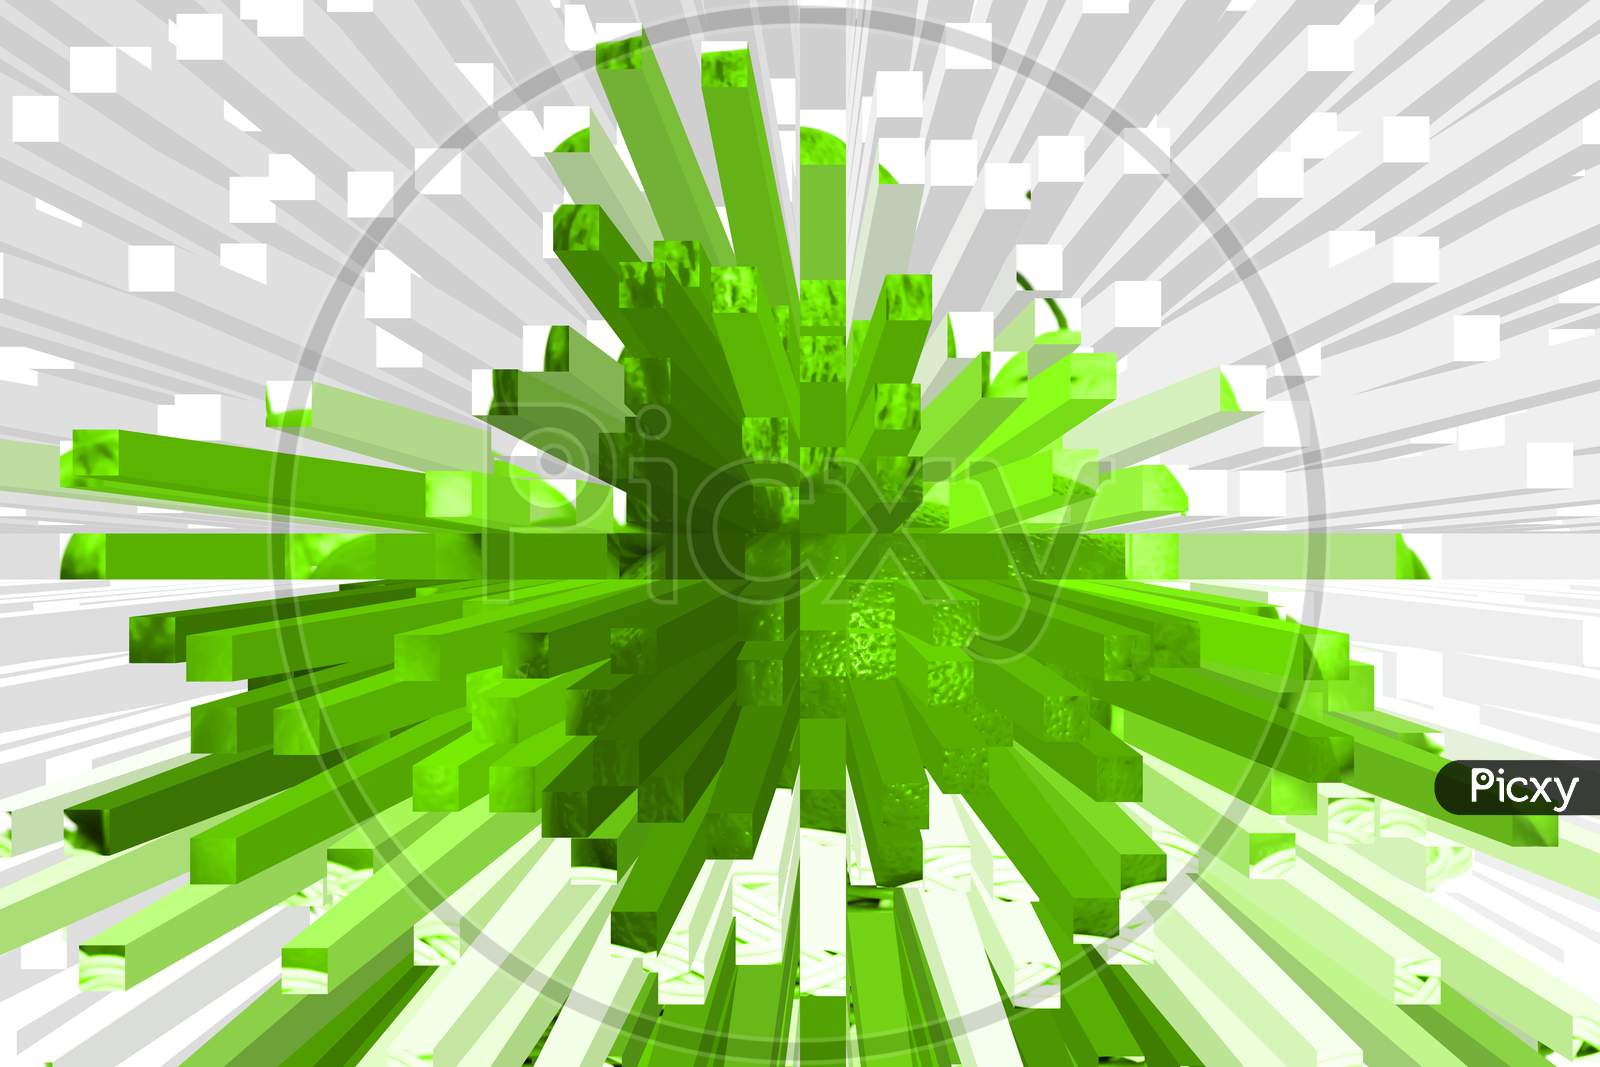 Green And White 3D Illustrator Explosion Effect. Useful For Backdrop Design